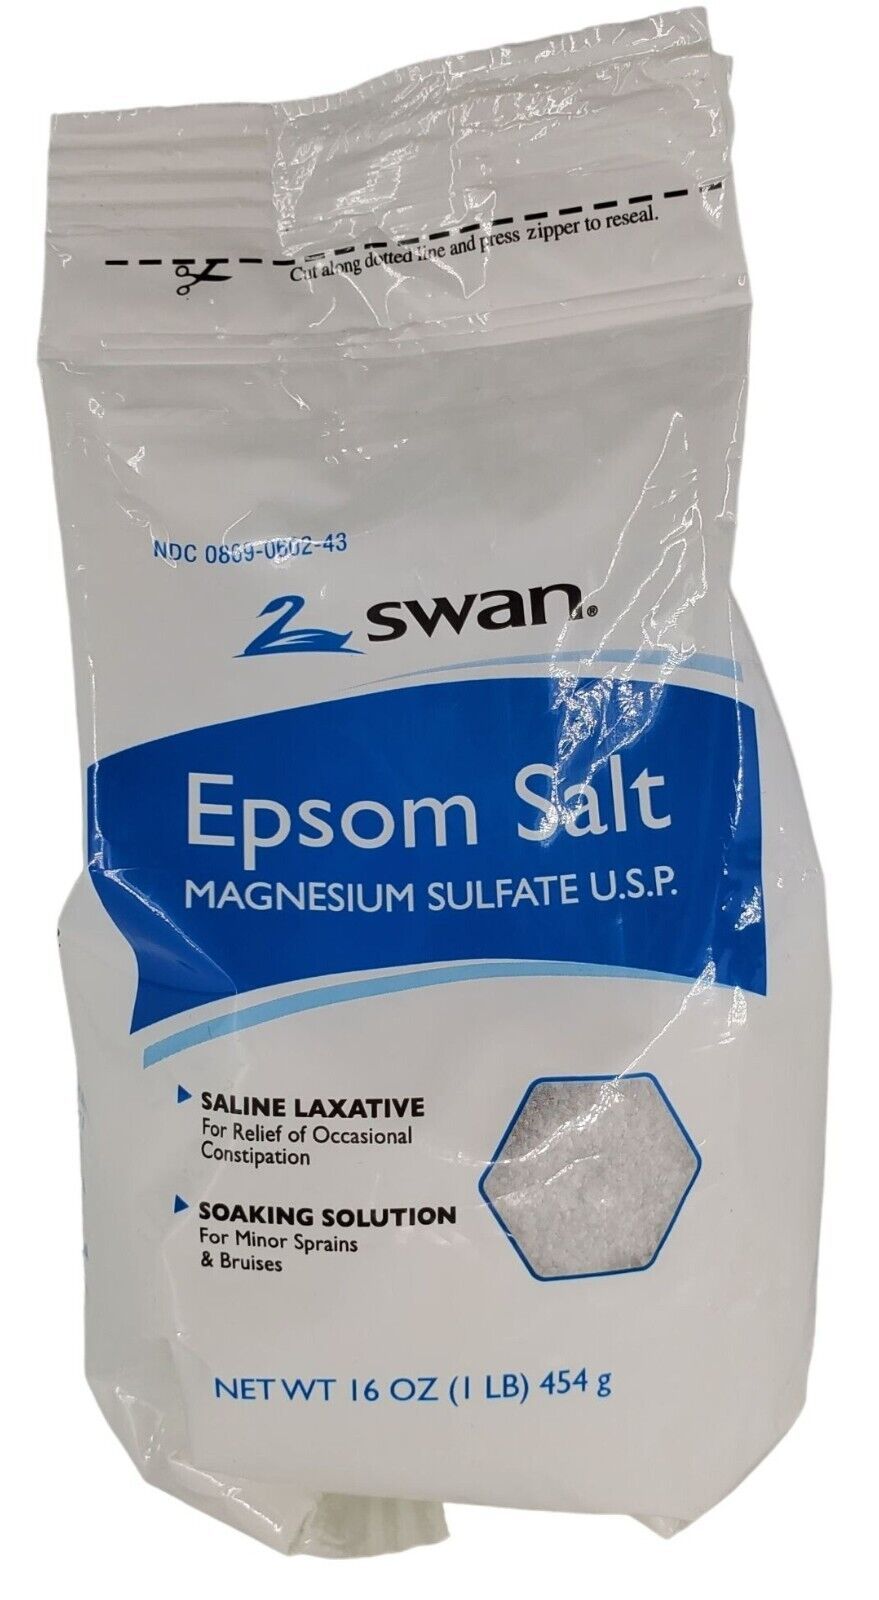 Primary image for Swan Epsom Salt Magnesium sulfate salts 1lb Resealable bag Foot Soaks, Laxative 